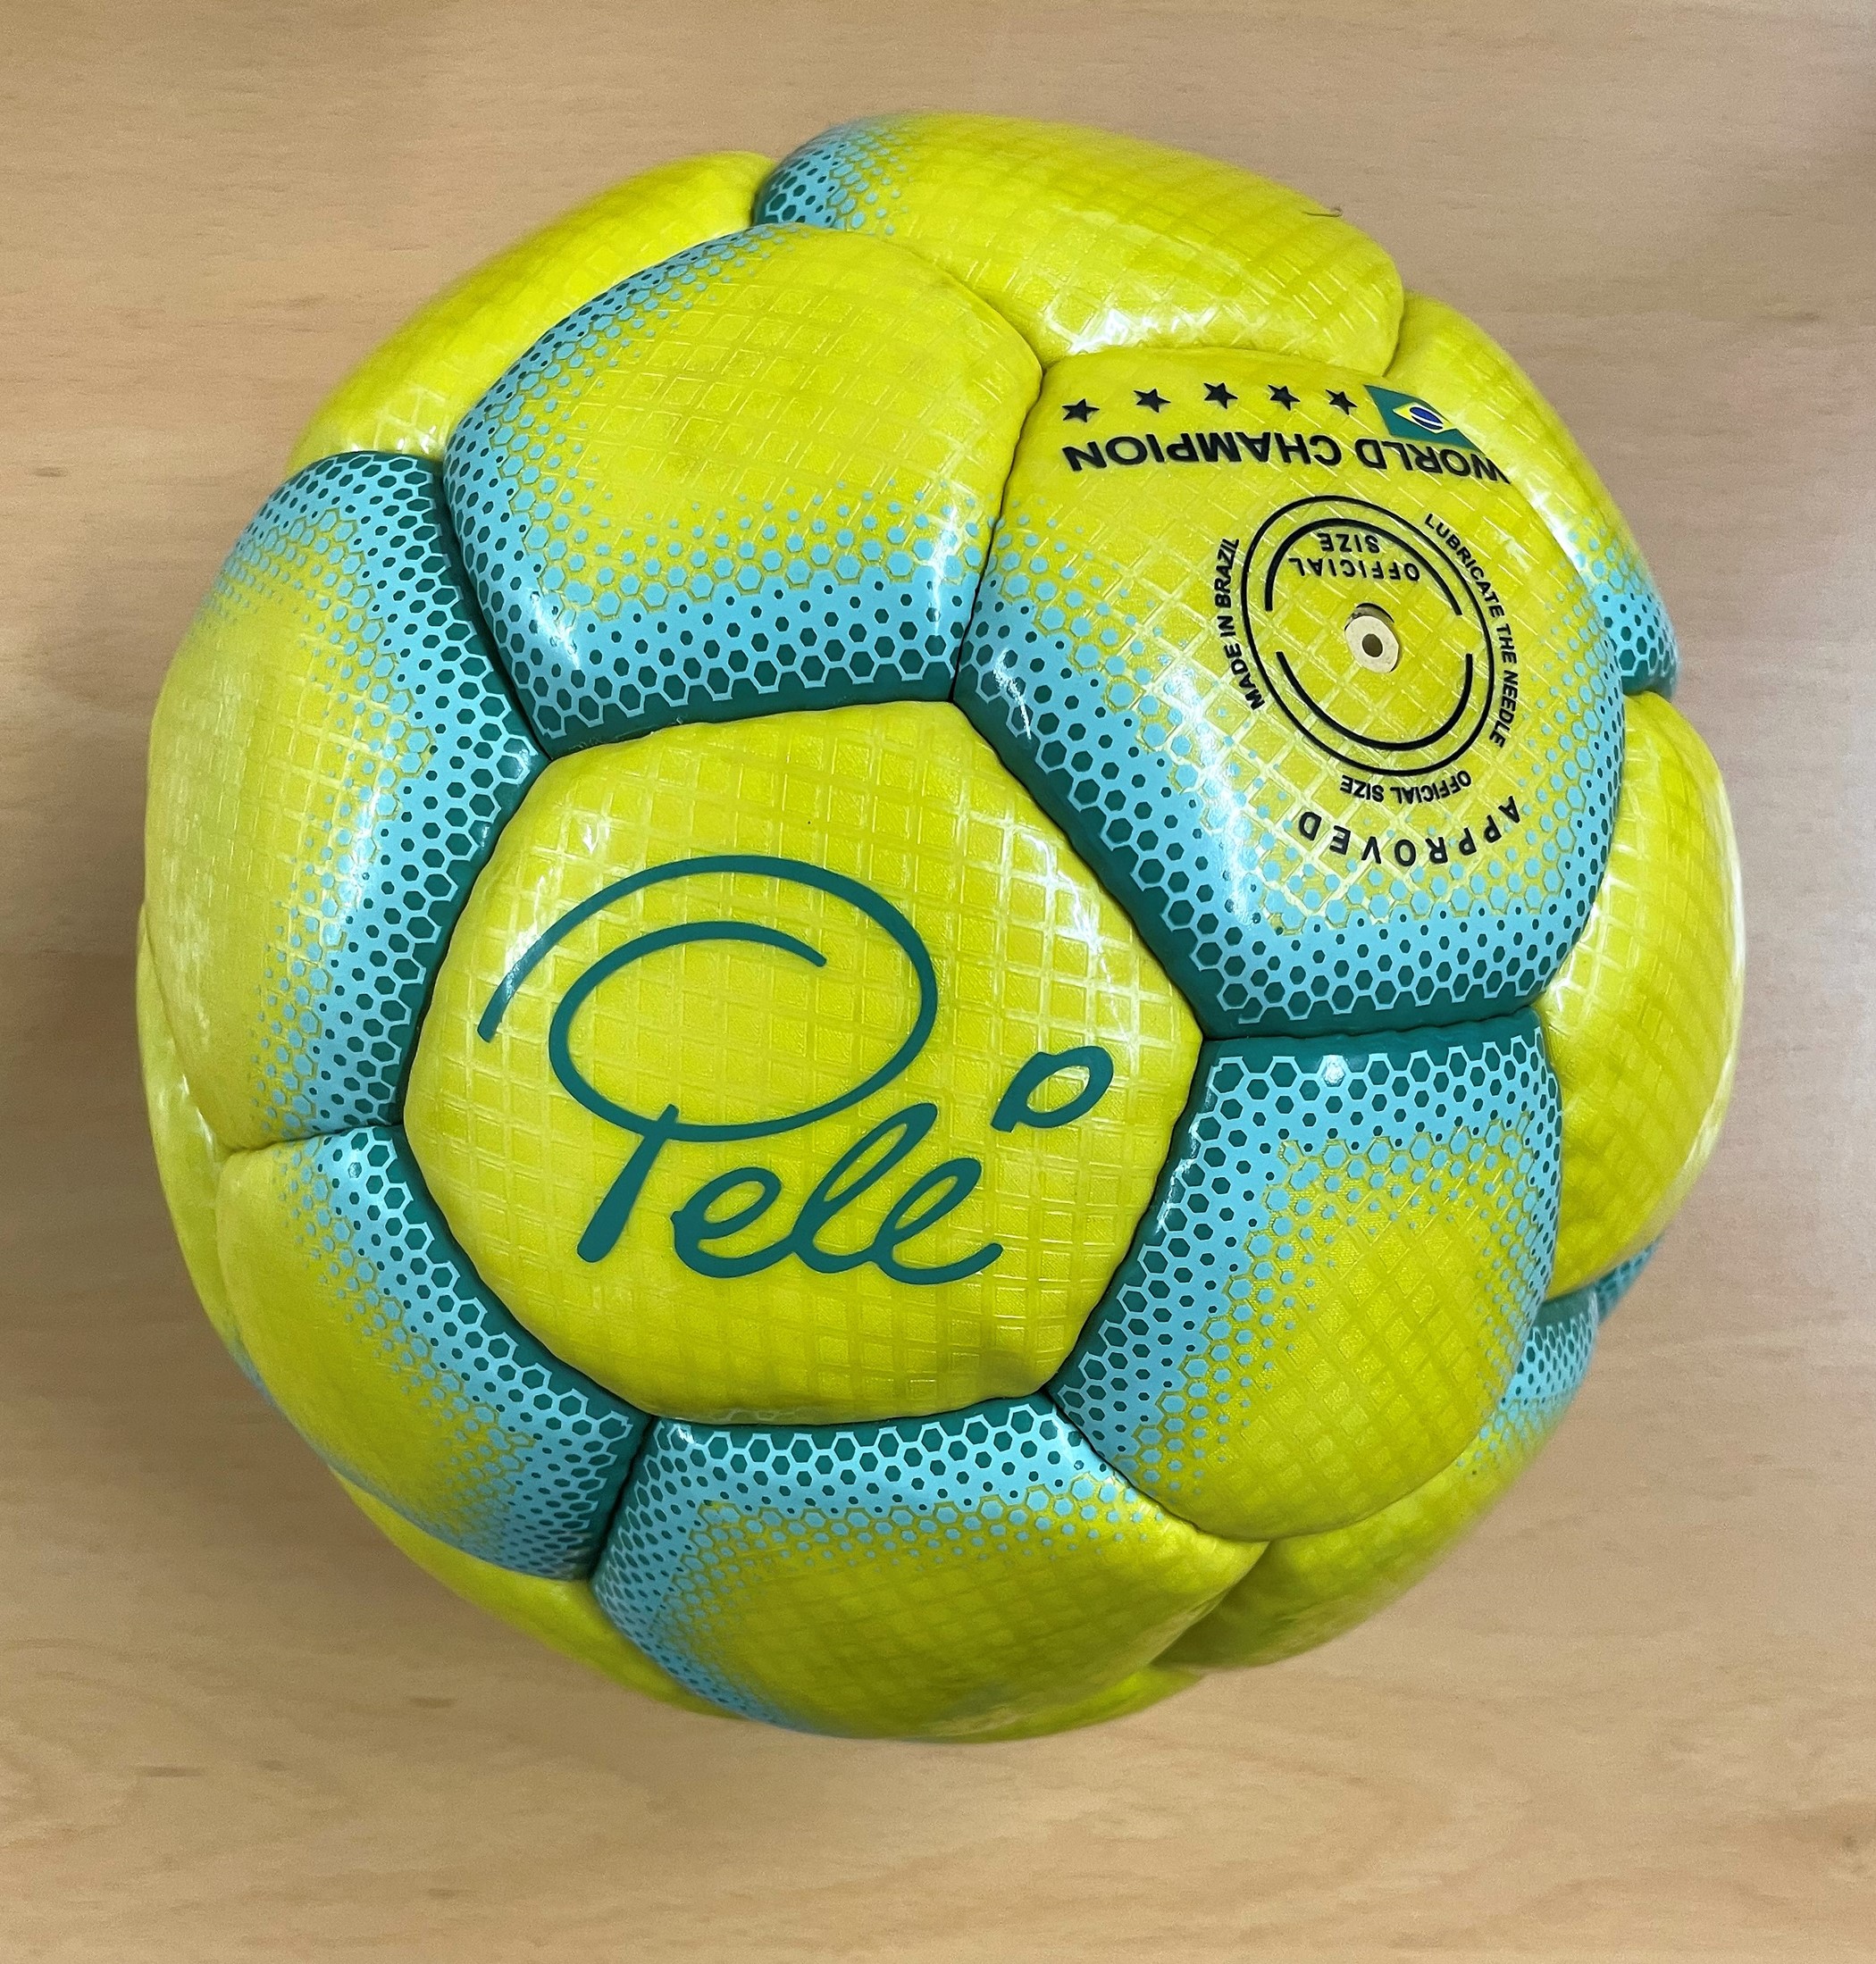 A yellow and green Café Pelé football owned by Pelé. The ball features Pelés faux signature in